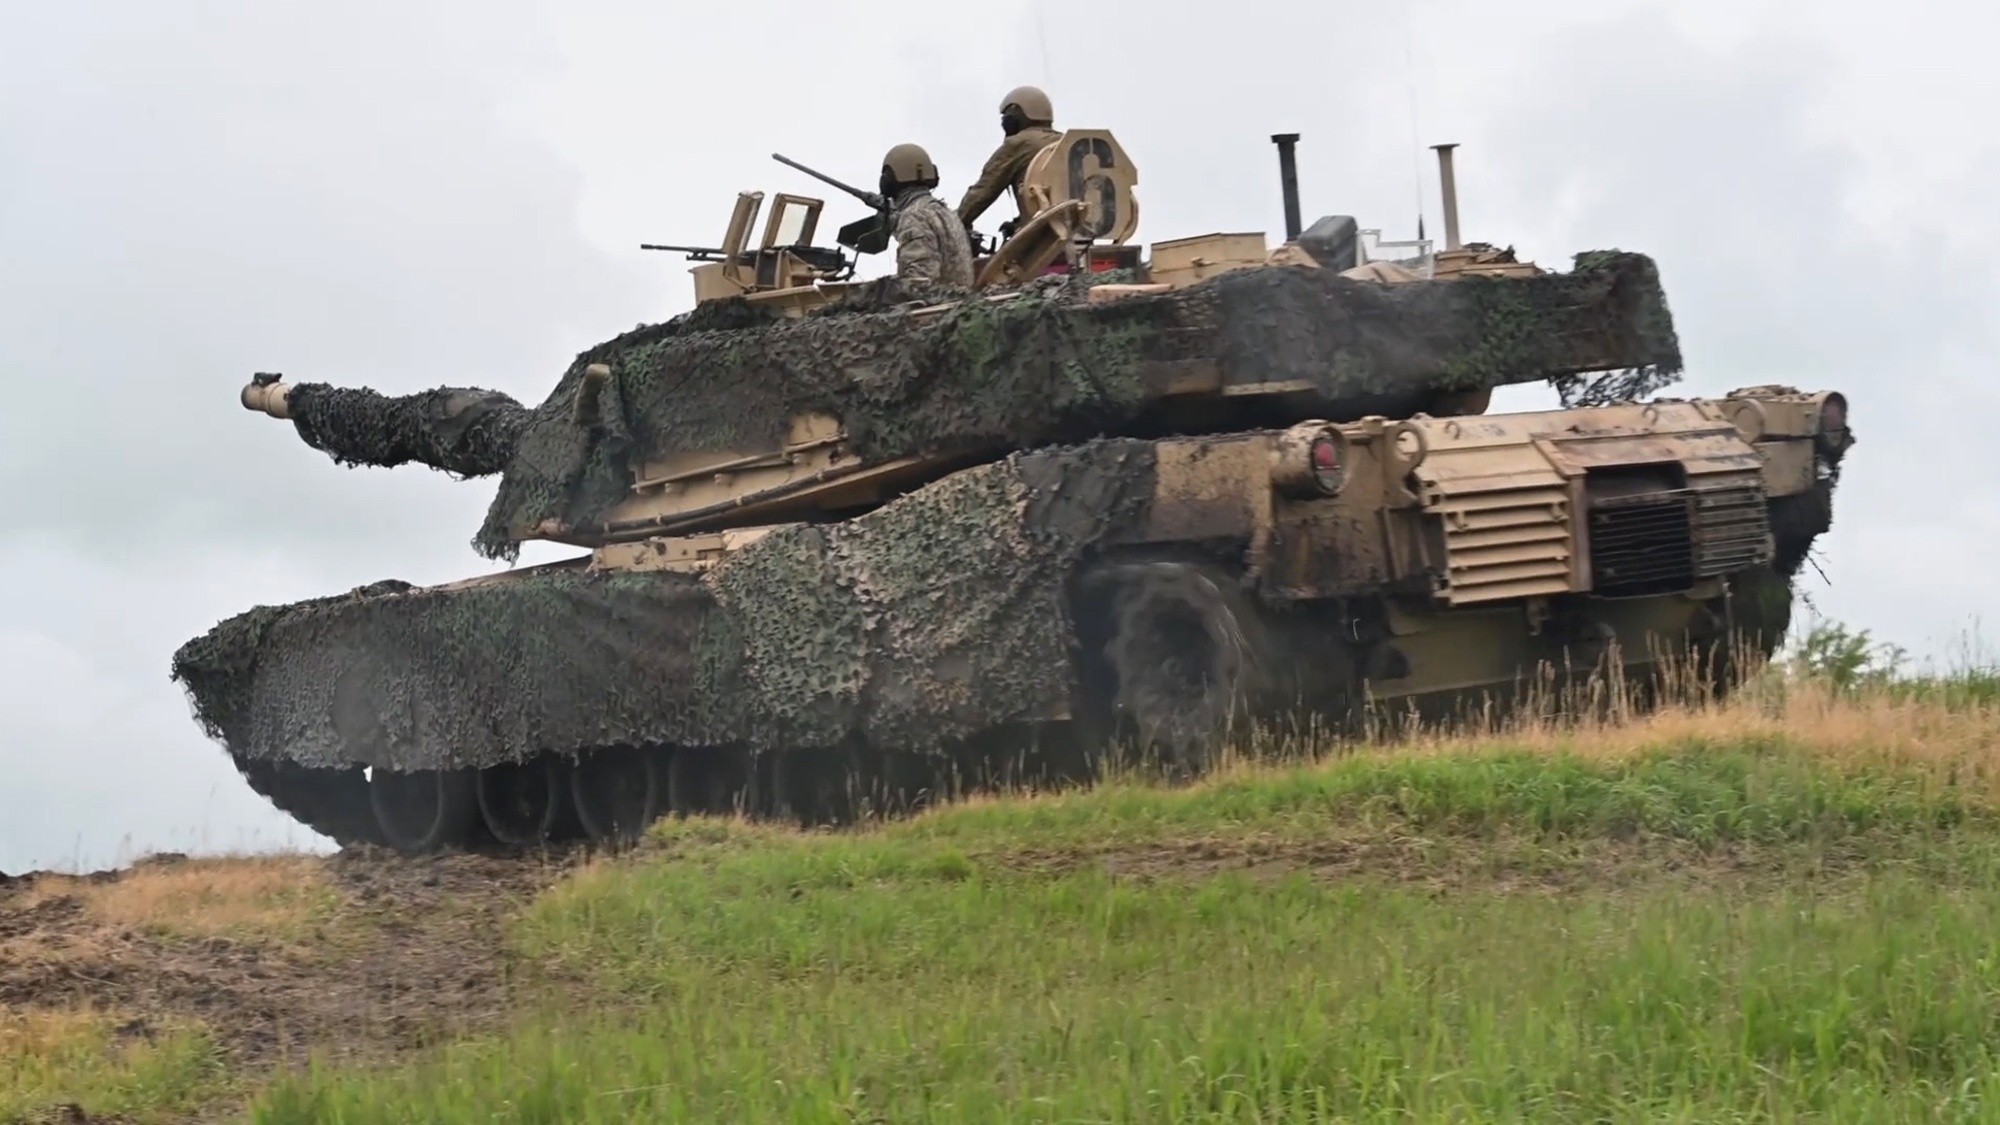 NATO Carries Out Steadfast Defender Military Exercise Involving Over